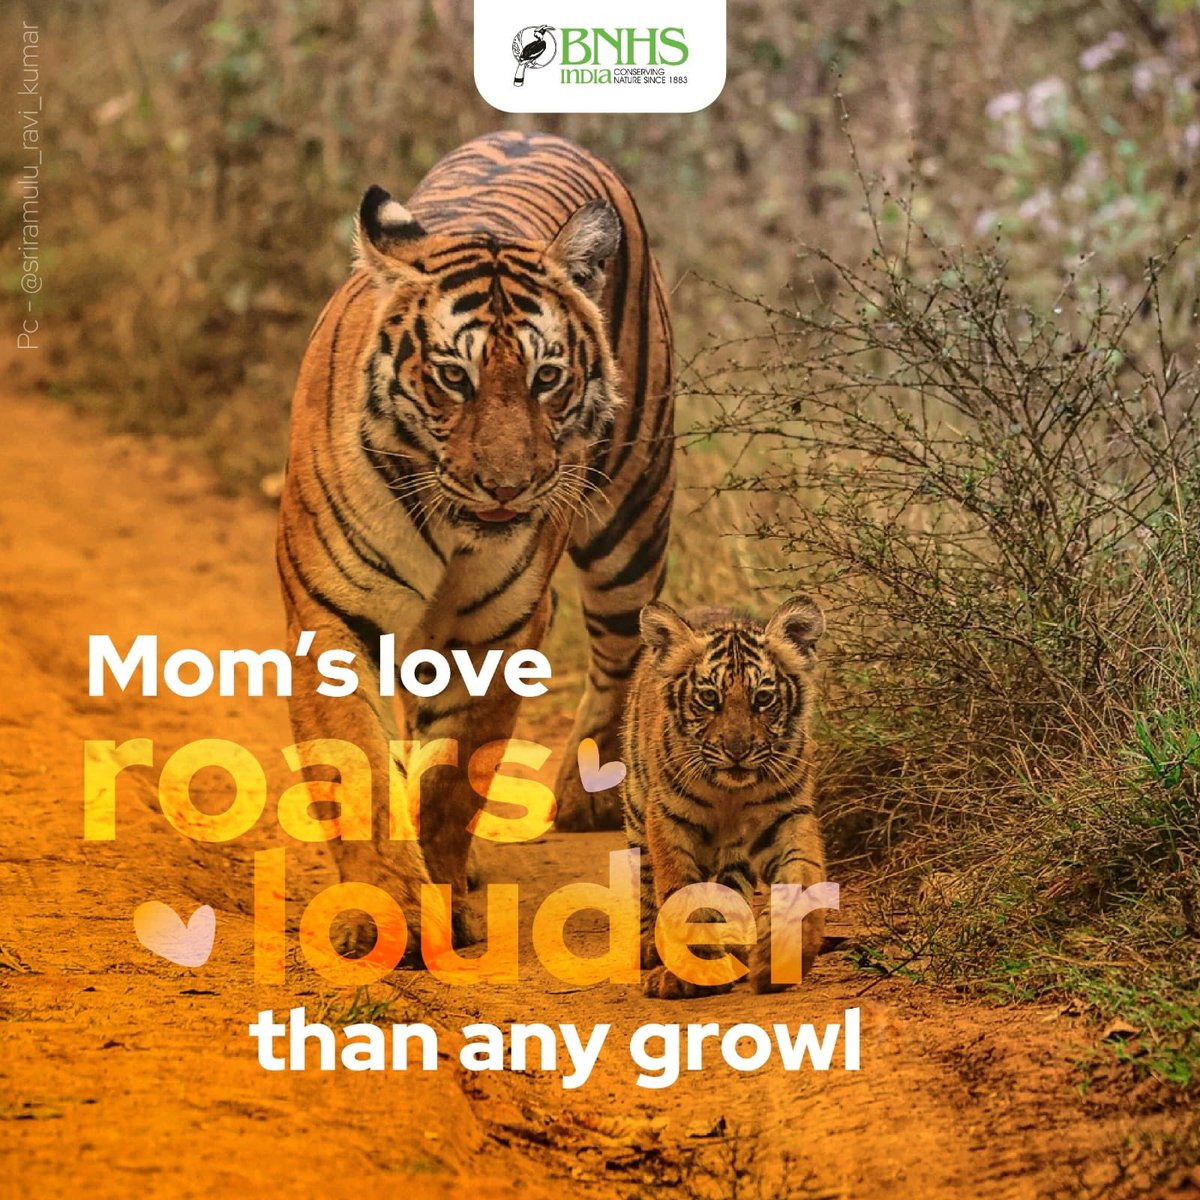 Roaring shoutout to all moms out there - you're pawsitively purrfect! ❤️

#BNHS #MothersDay